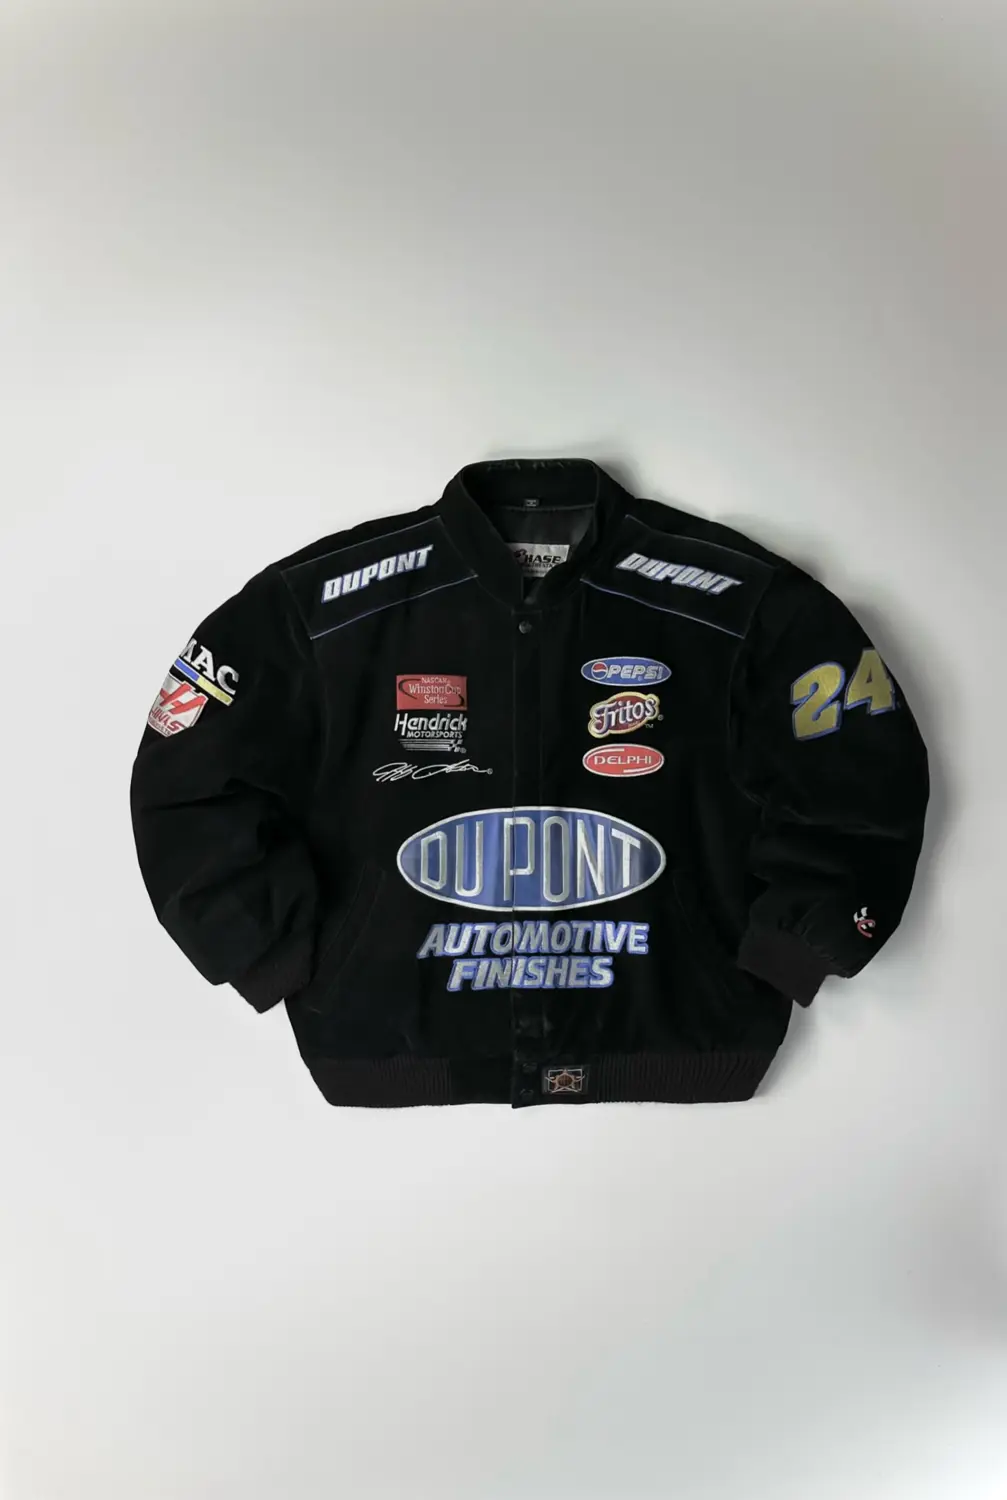 VINTAGE 90's NASCAR LEATHER SUADE RACING JACKET CHASE AUTHENTIC